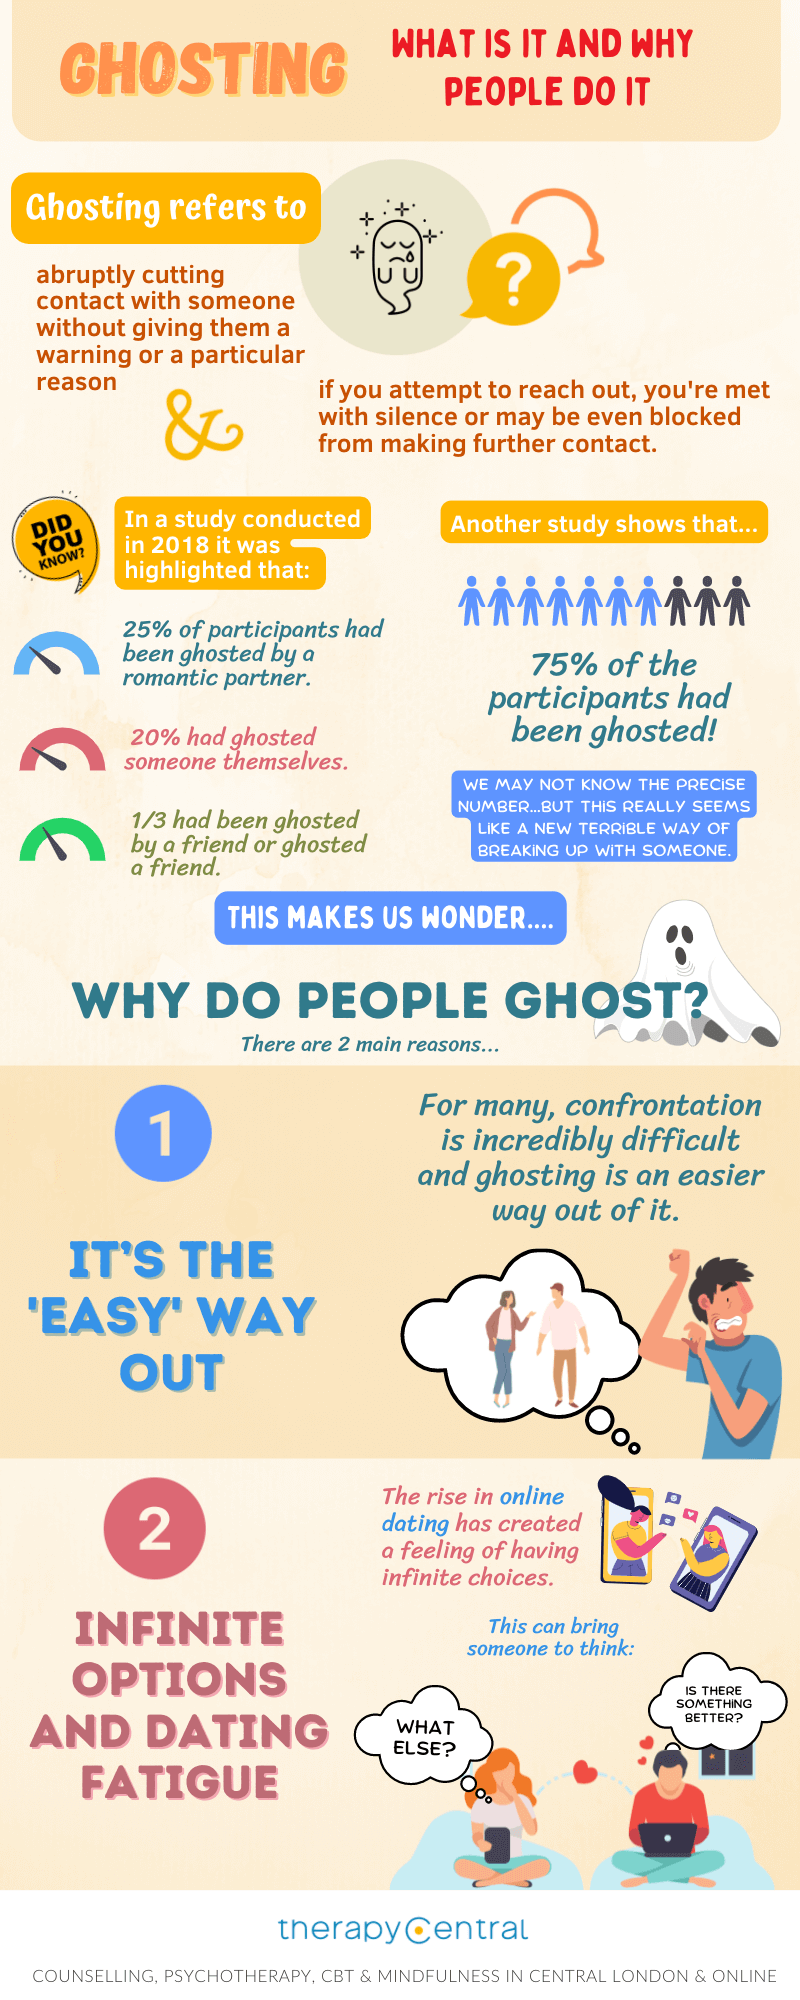 Ghosting - What is it and why people do it